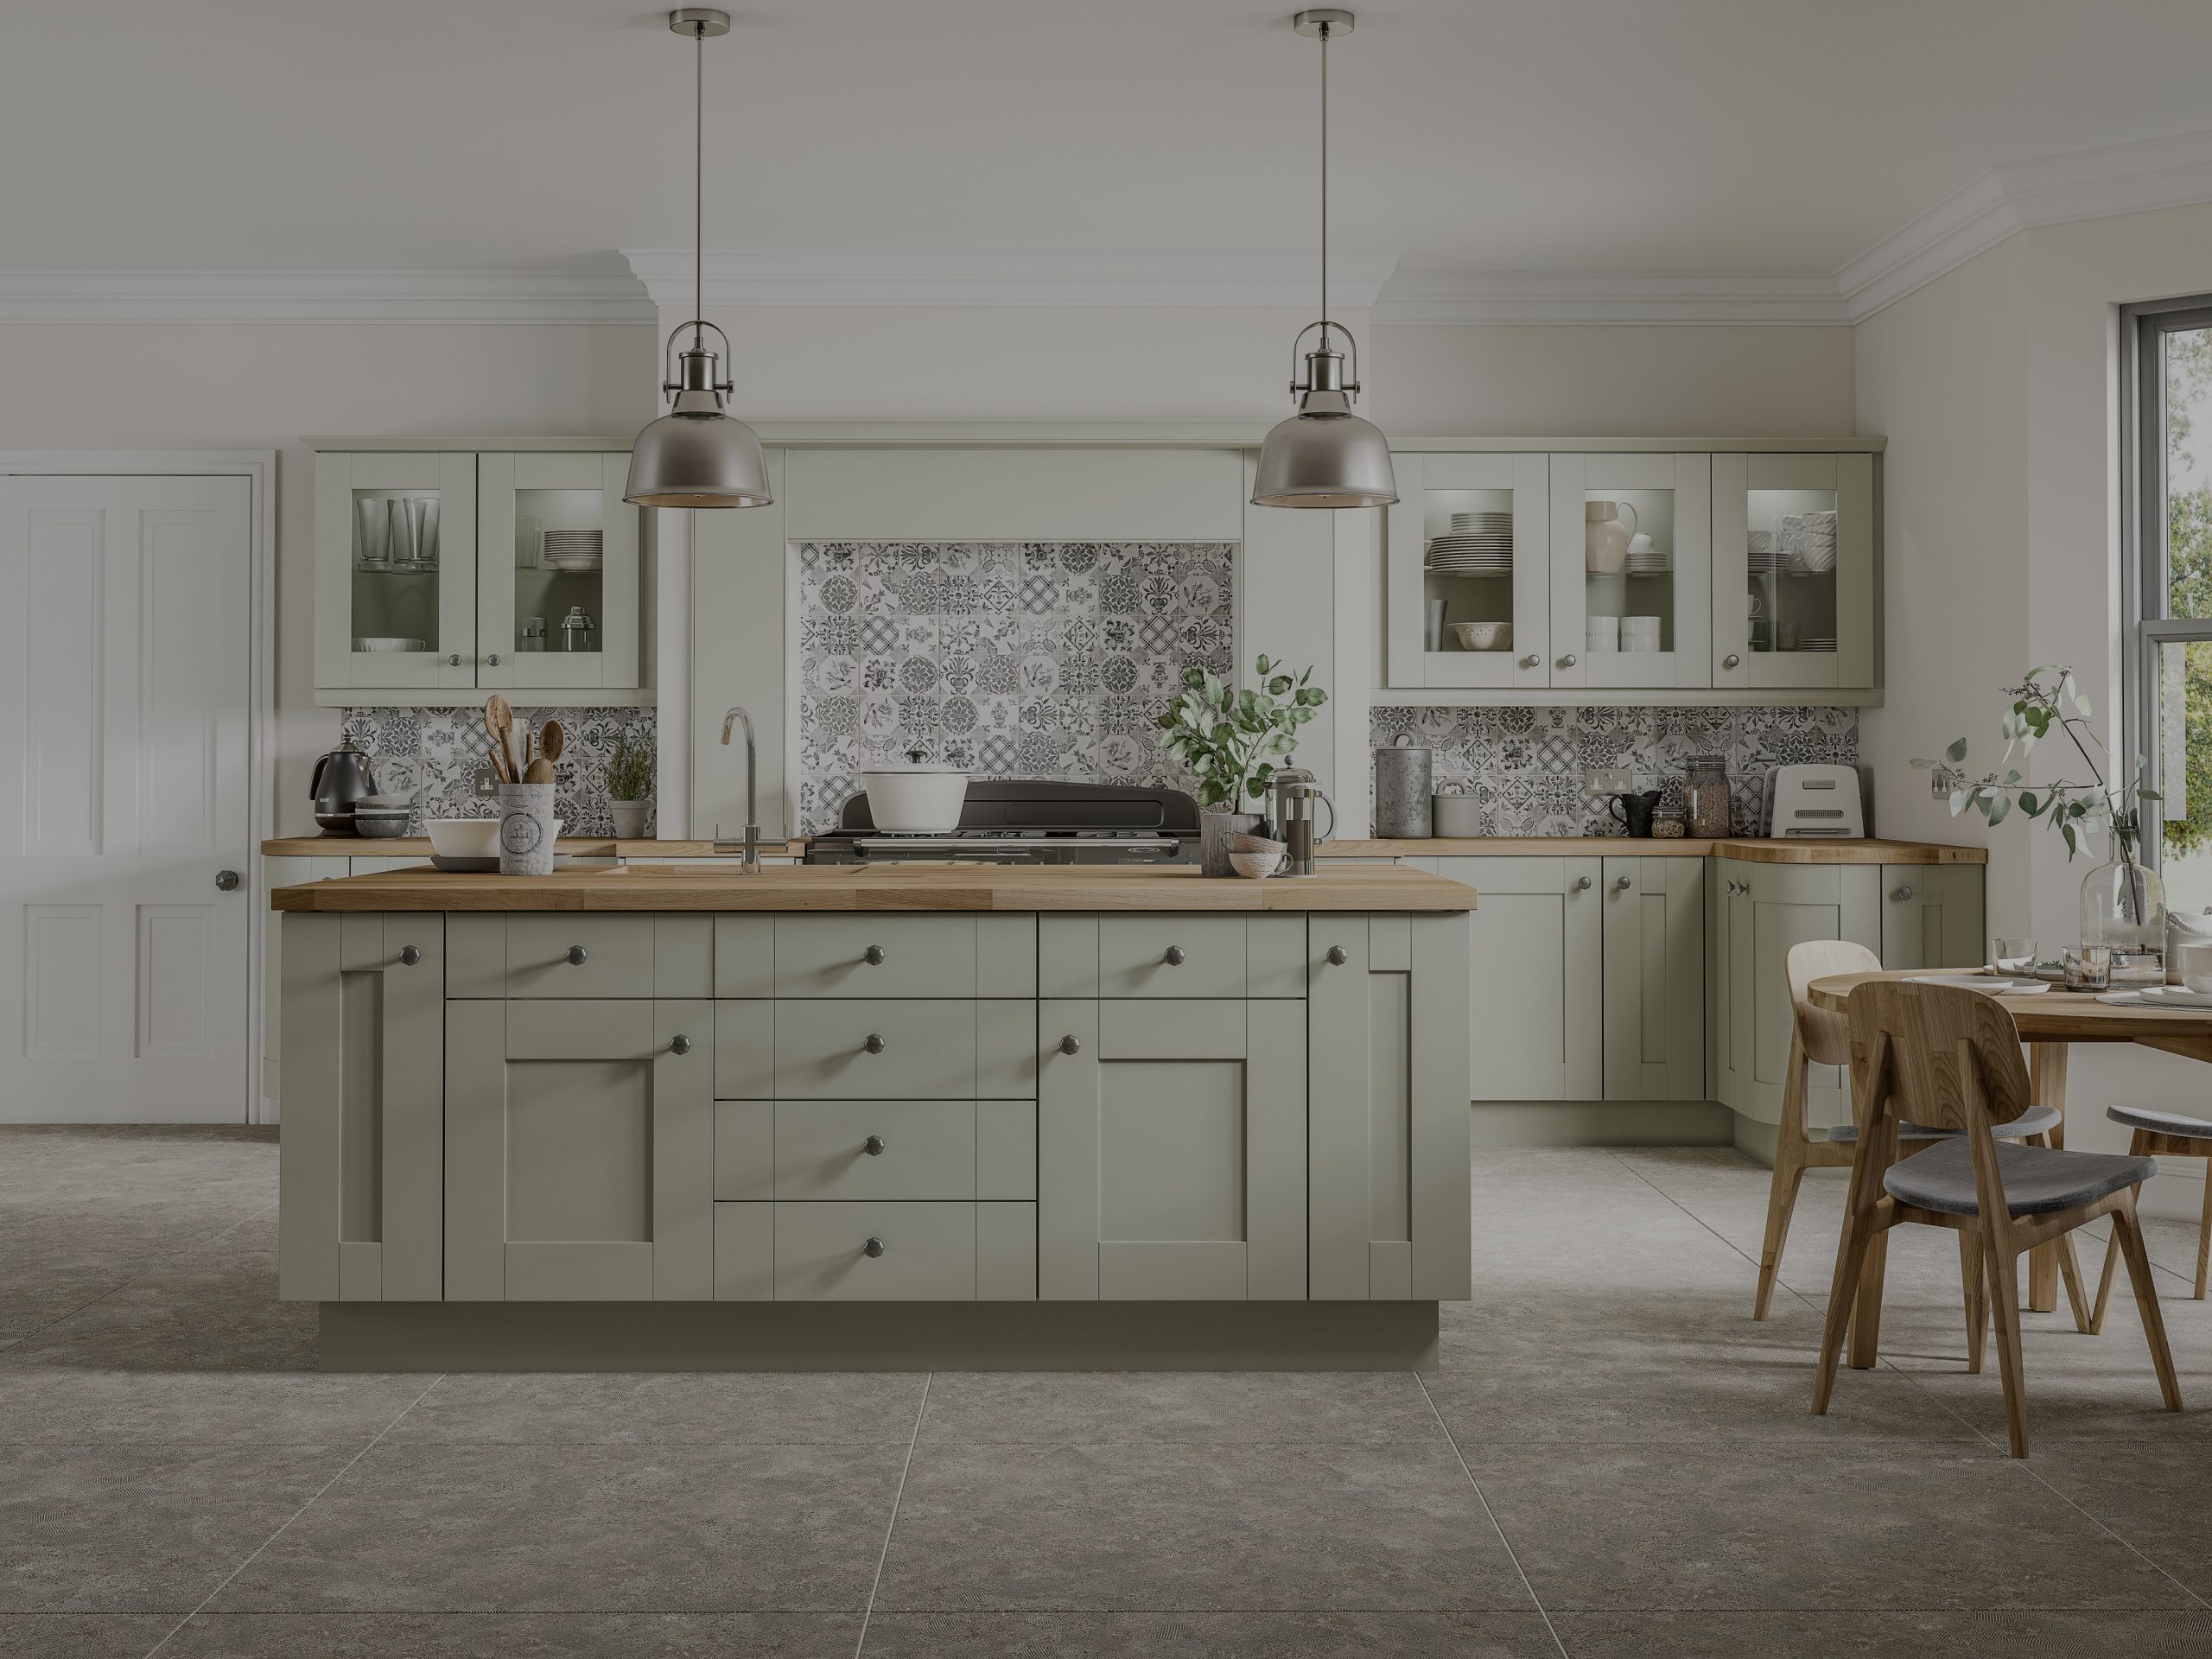 Classic/Traditional kitchen area with island bay and classic pastel green cabinetry